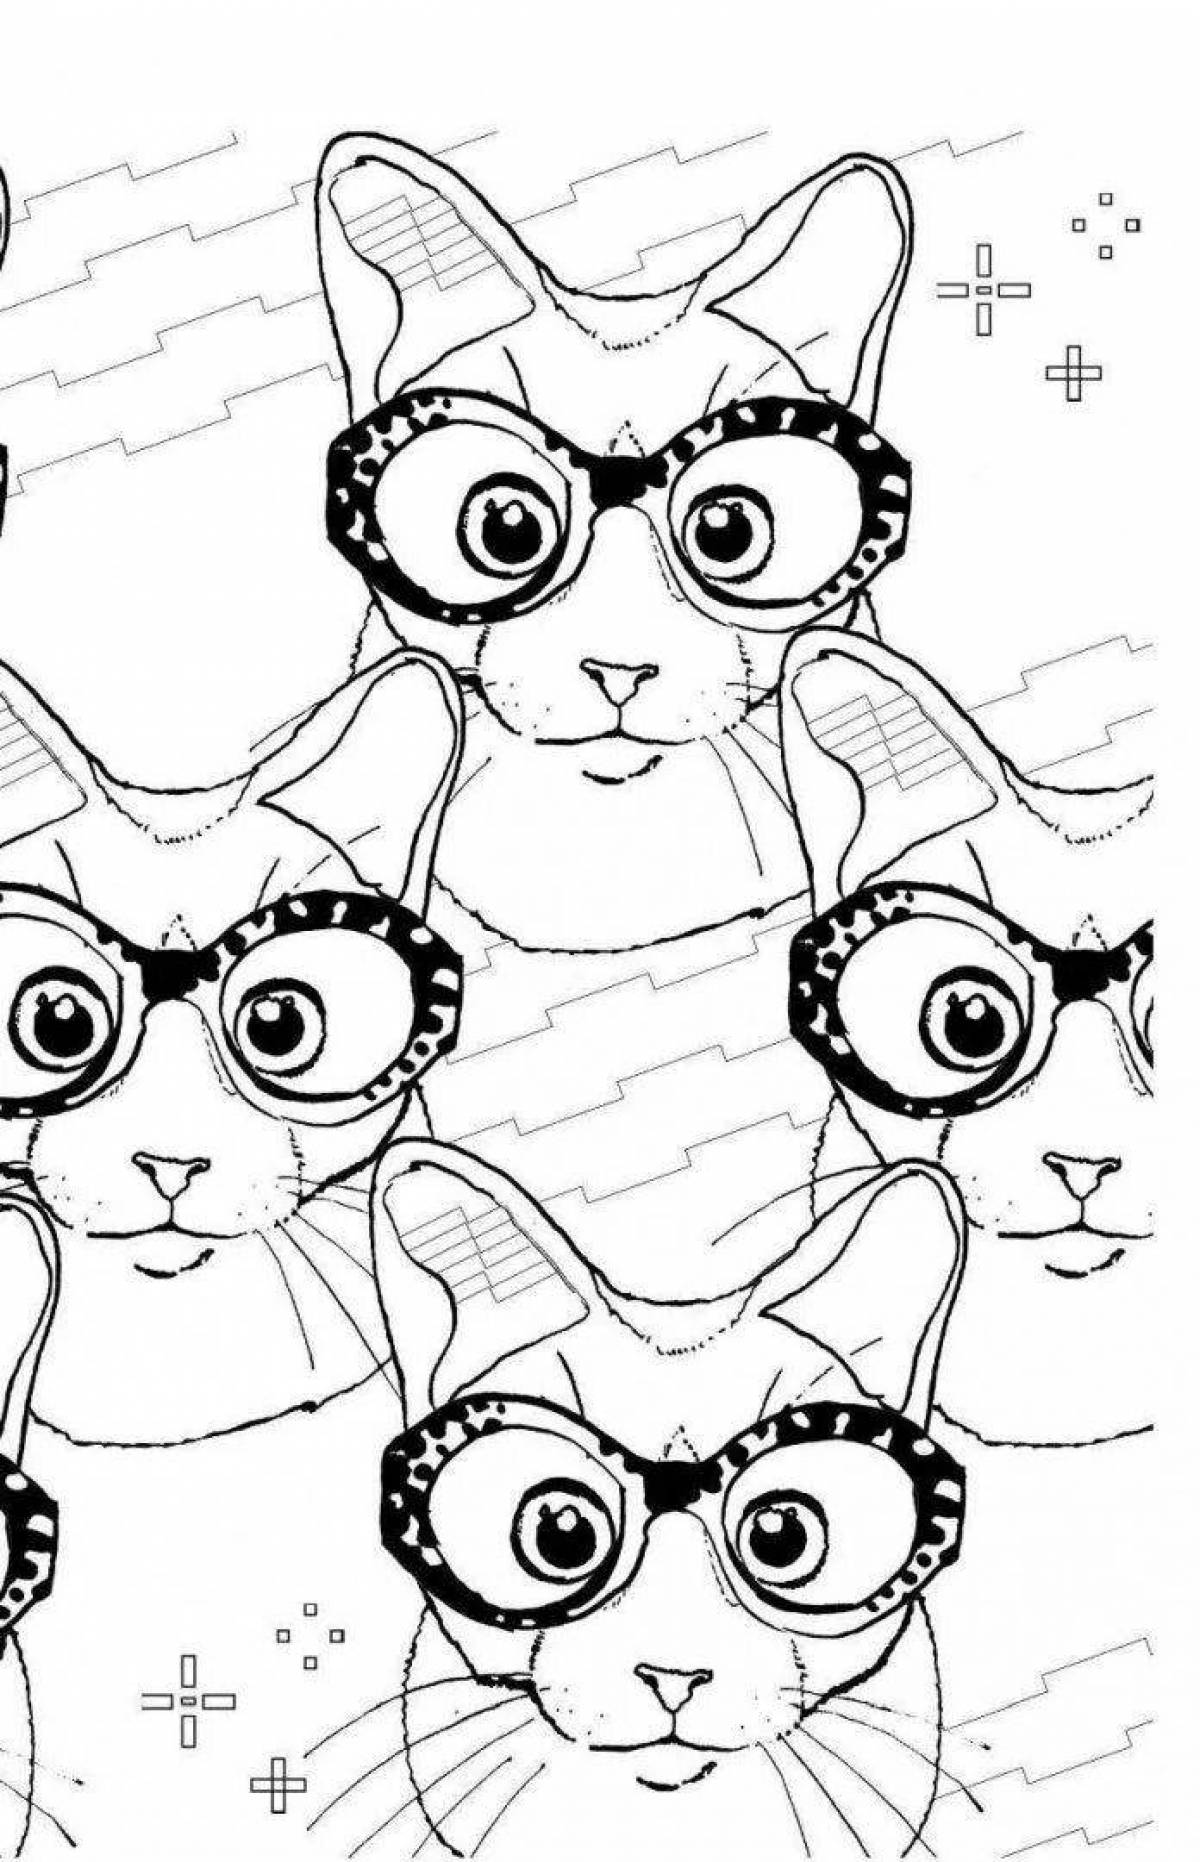 Bright cat therapy anti-stress coloring book